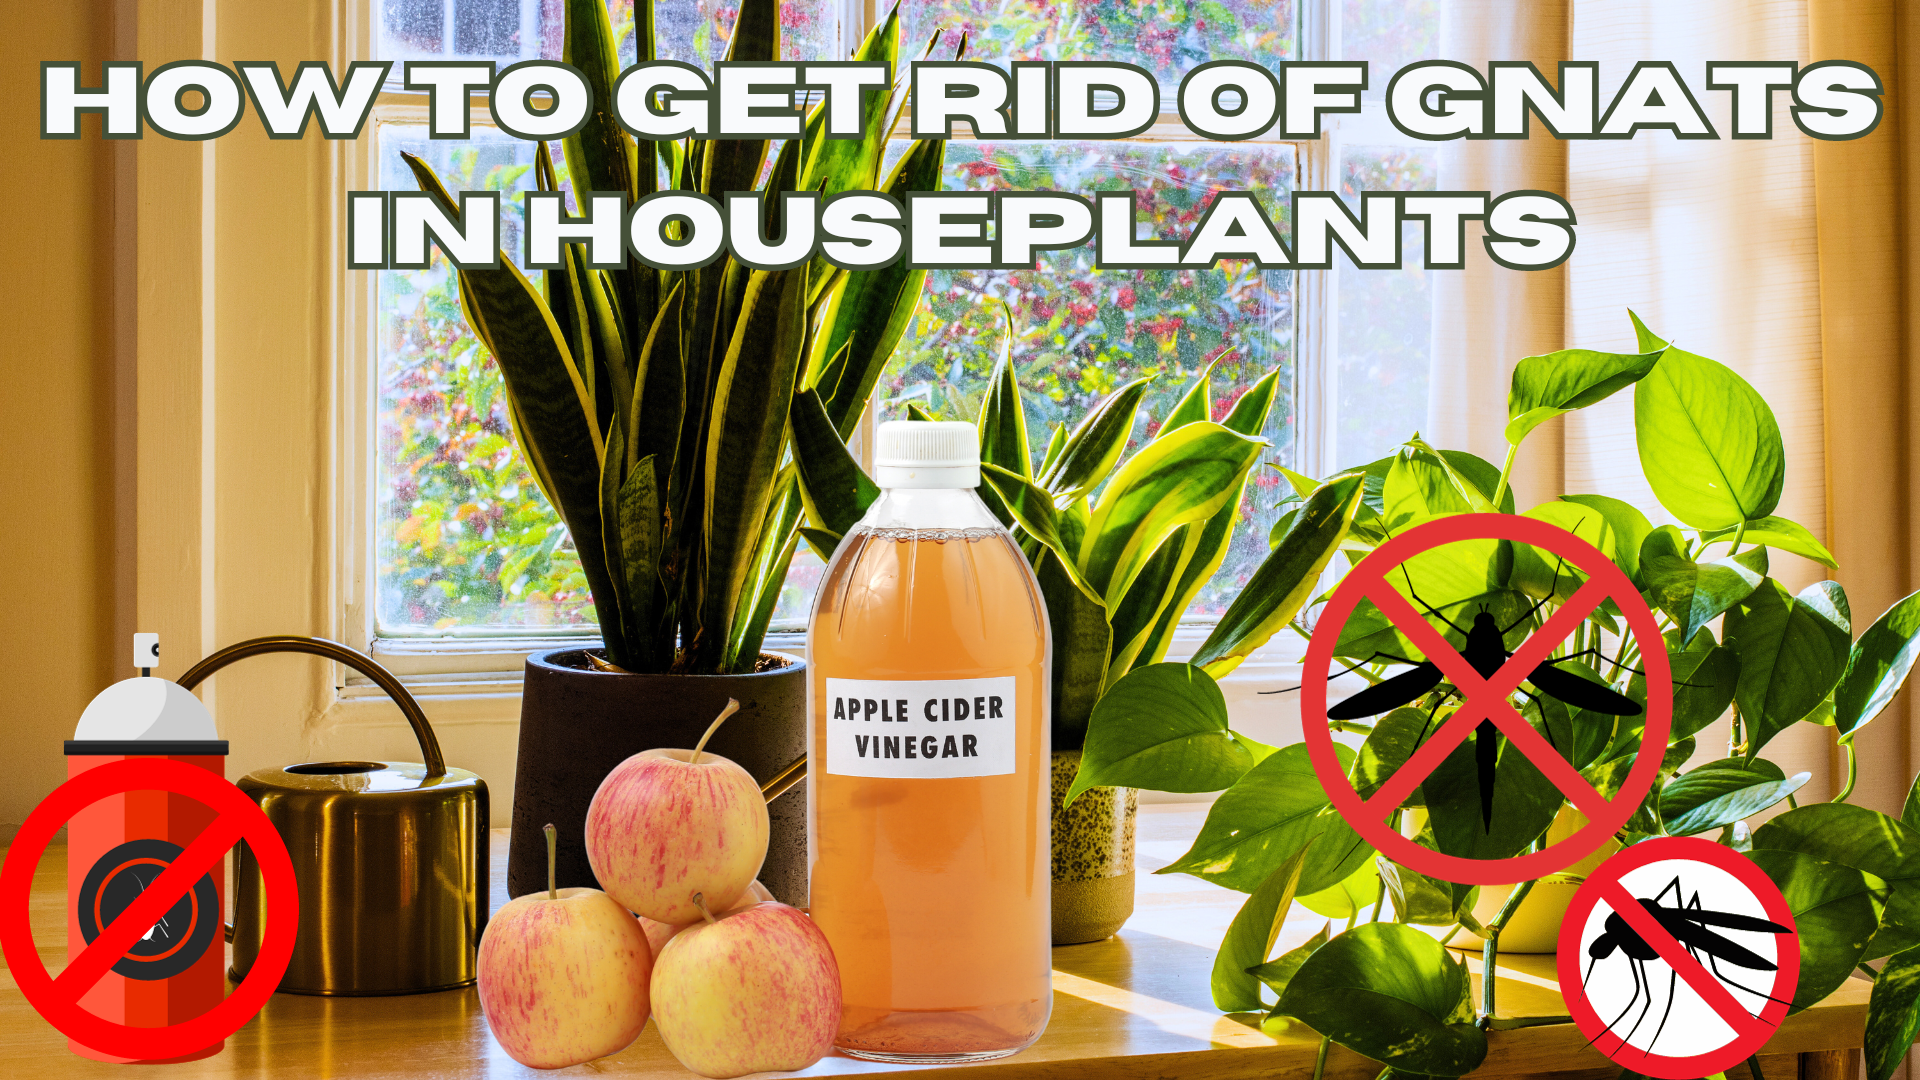 Learn how to get rid of gnats indoors with this simple fruit fly trap.  #lifehacks